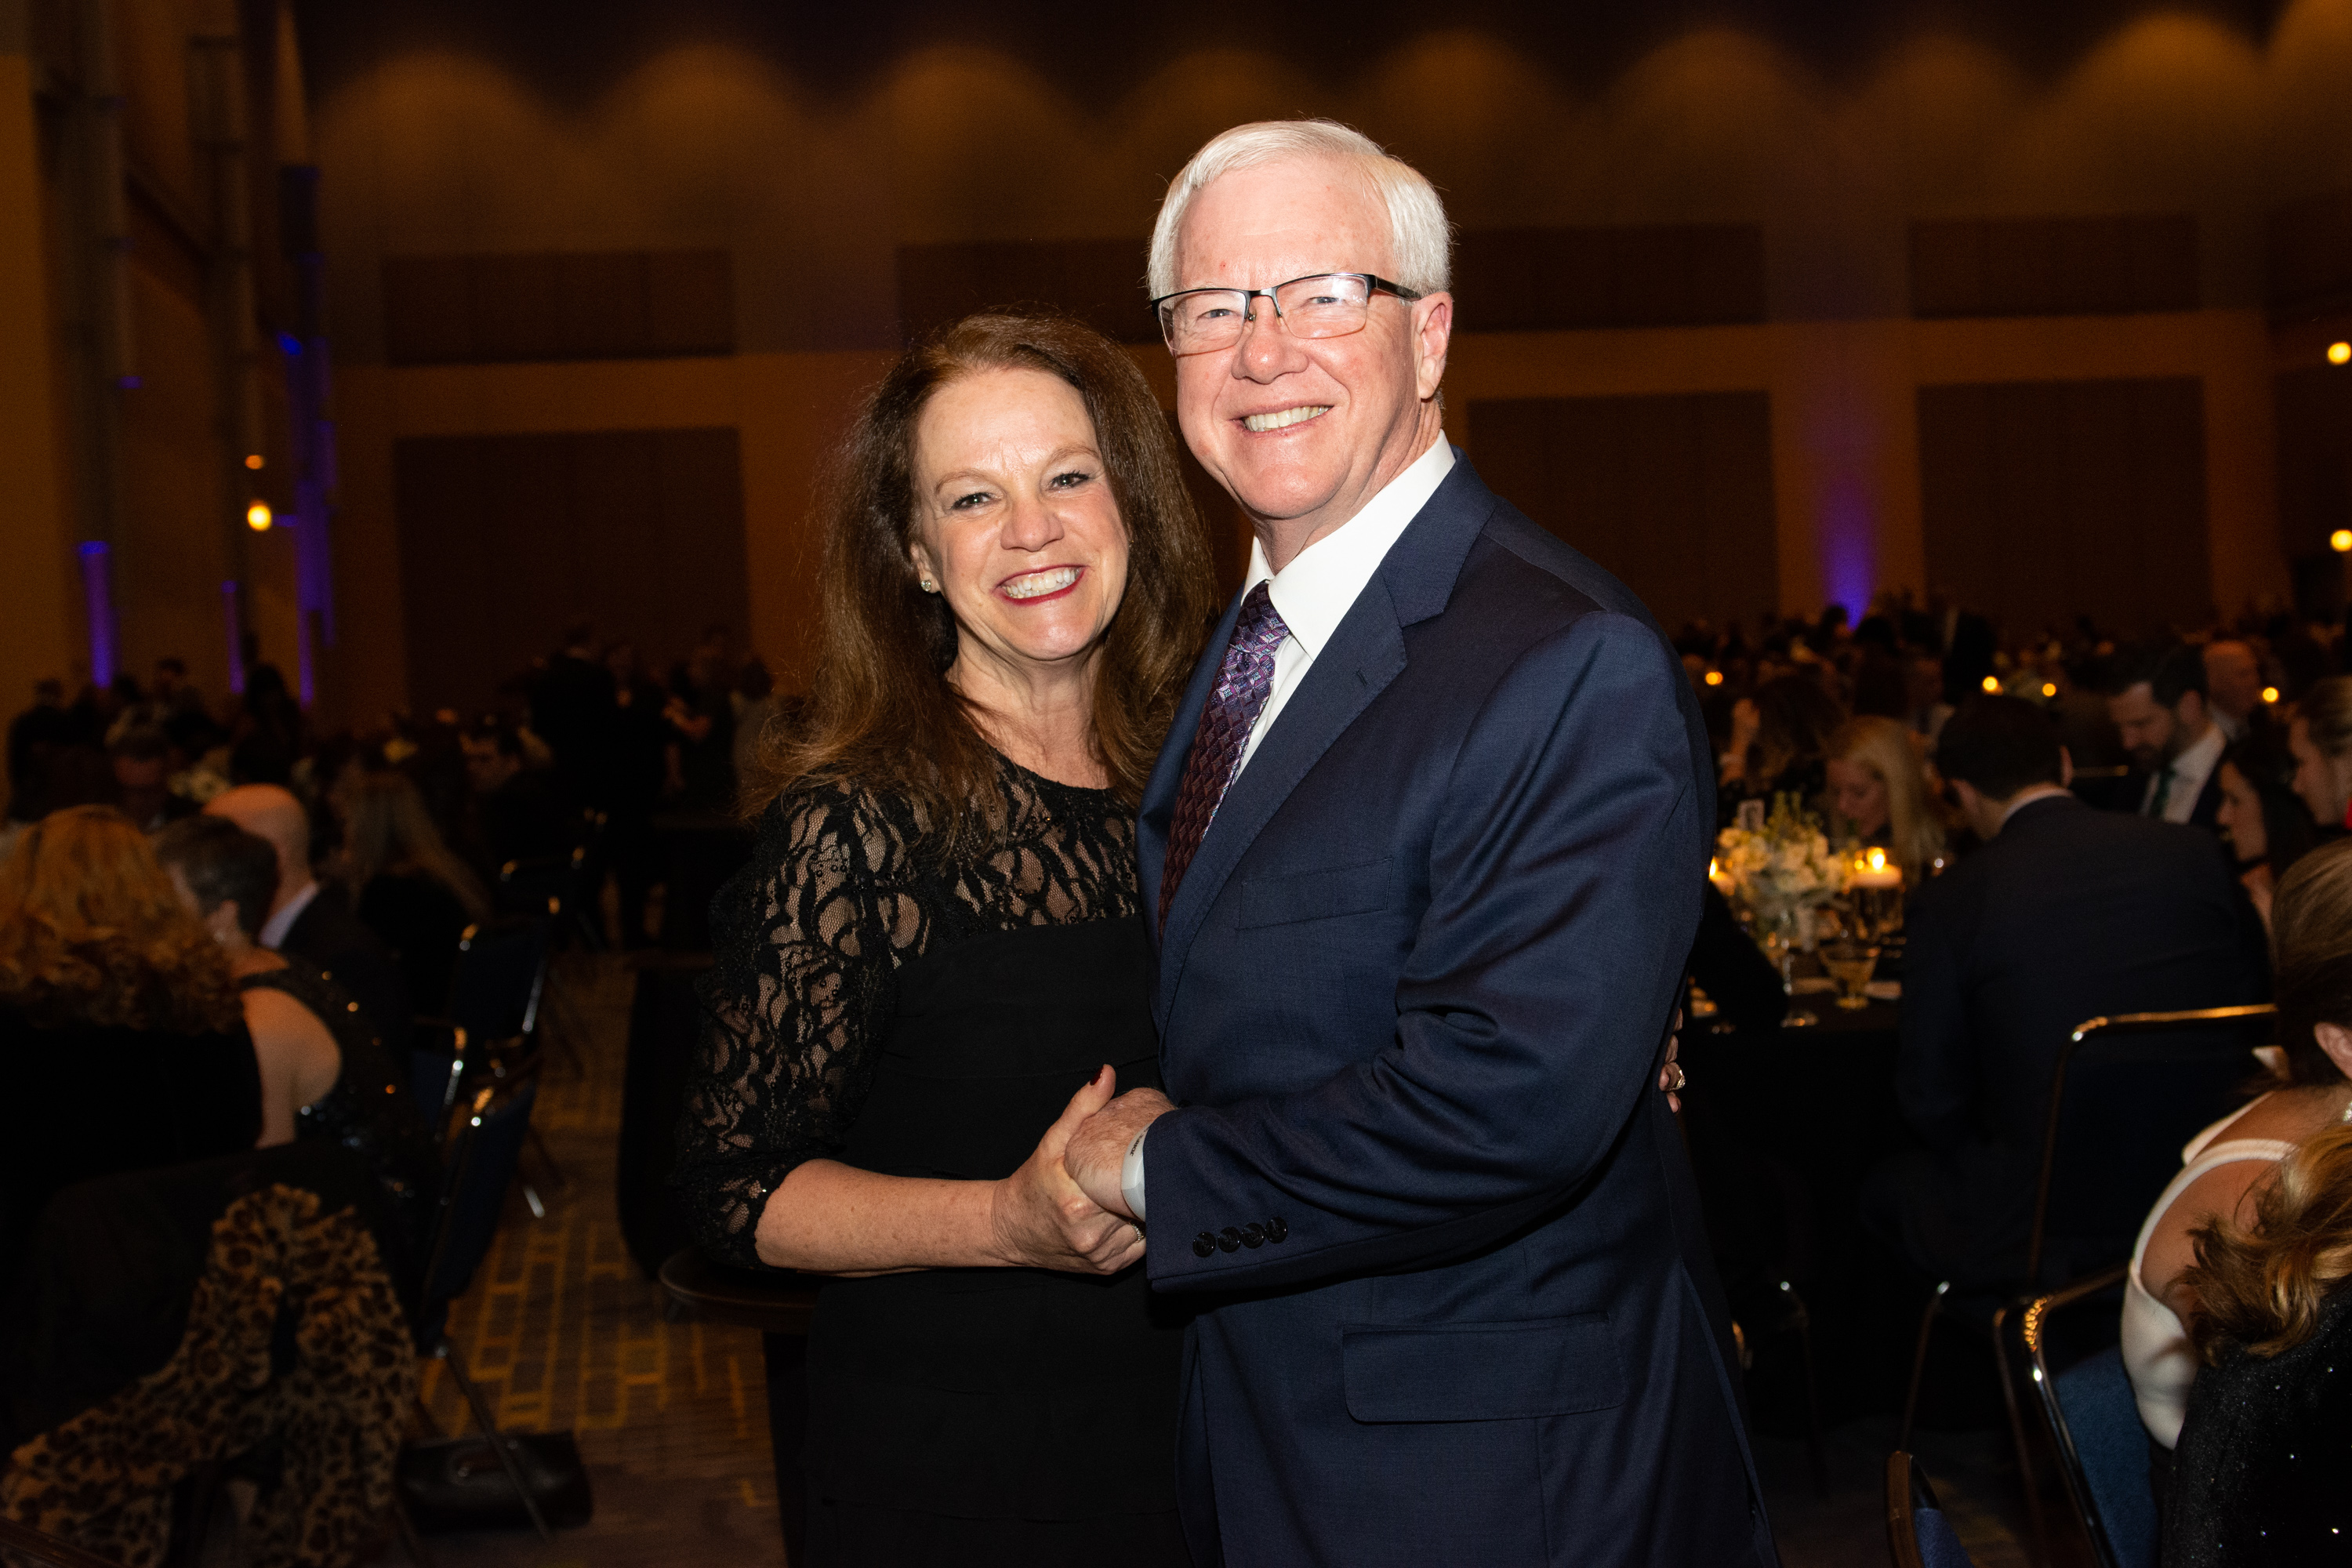 JDRF Illinois Board President Mike Roche with his wife, Linda